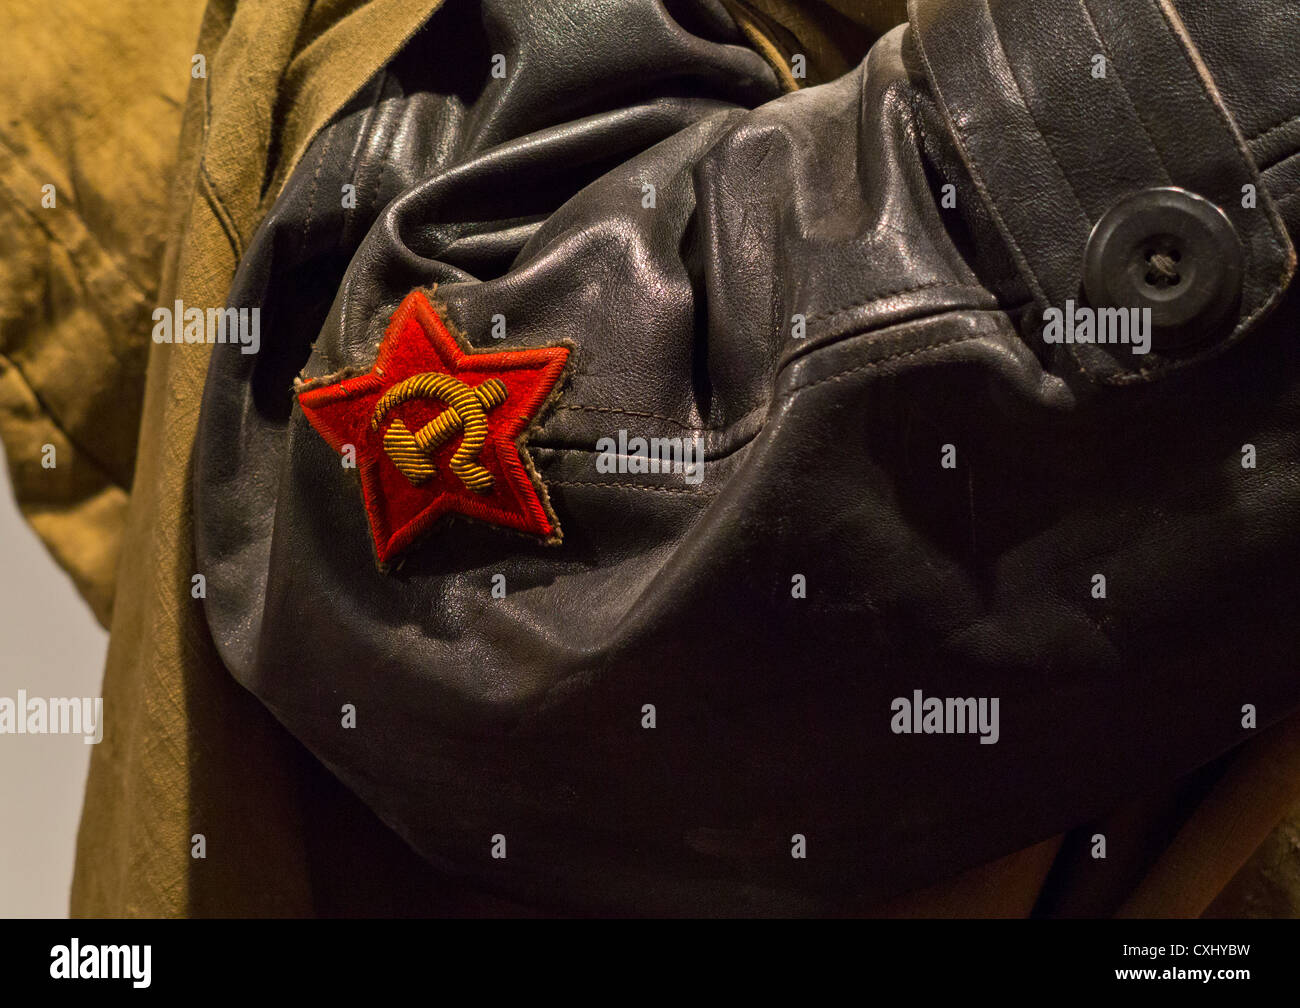 Russian HAMMER & SICKLE WW2 pilot officer leather jacket badge of Red Star  with Hammer and Sickle World War II Second World War Stock Photo - Alamy